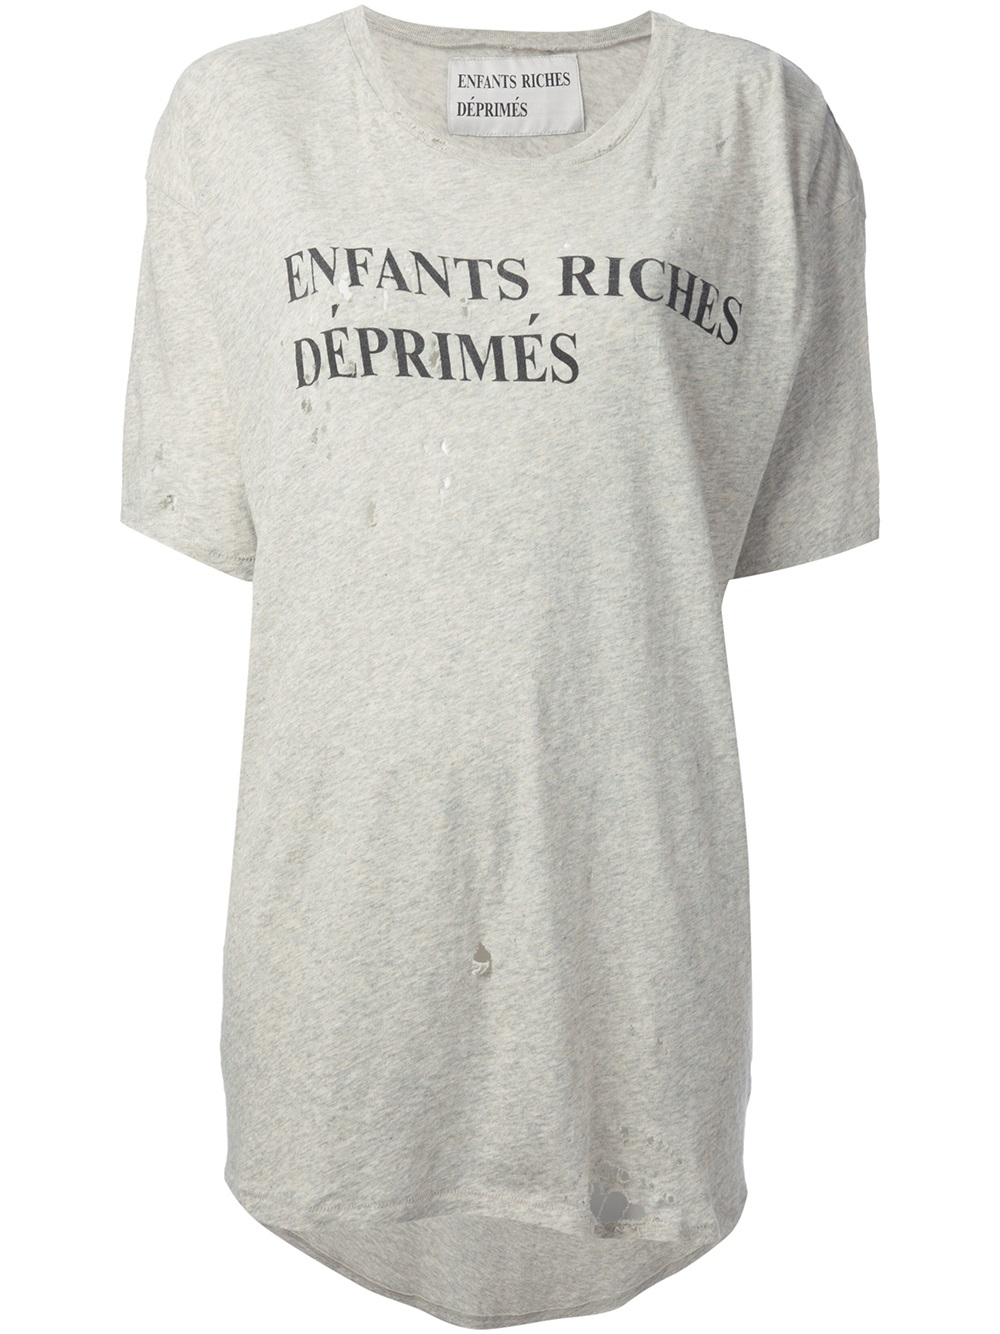 Lyst - Enfants Riches Deprimes Distressed Oversized T-Shirt in Gray